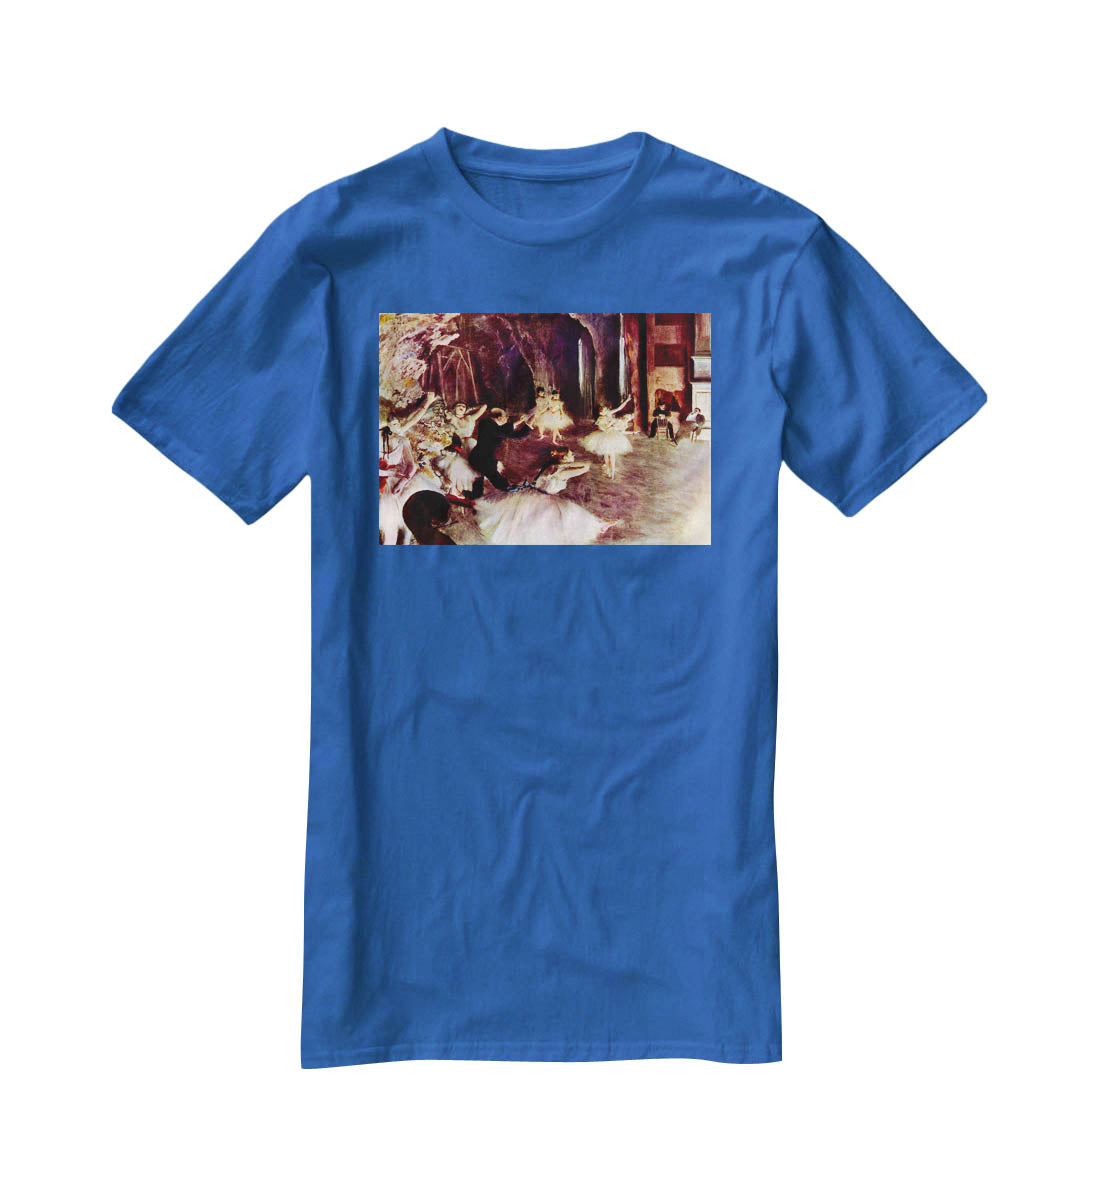 Stage trial by Degas T-Shirt - Canvas Art Rocks - 2